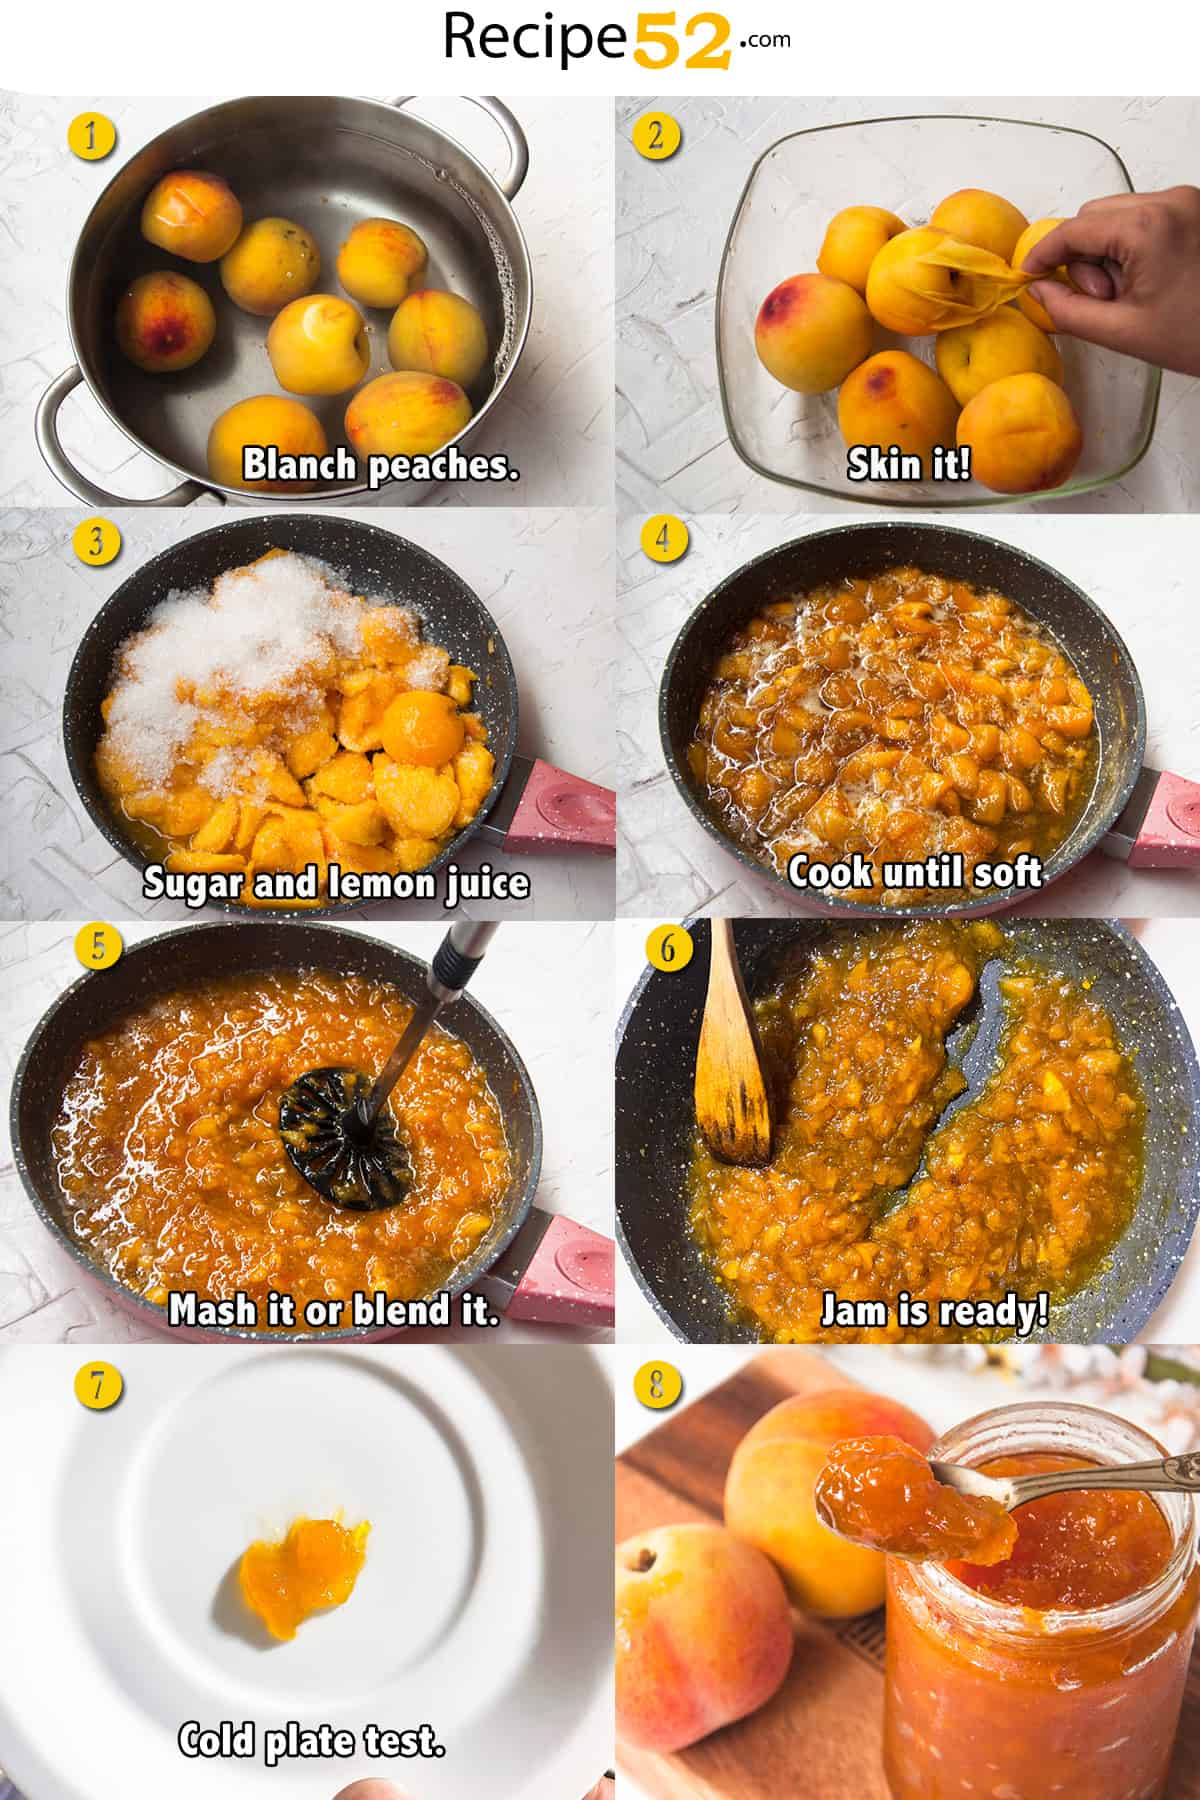 Steps to make peach jam without pectin.